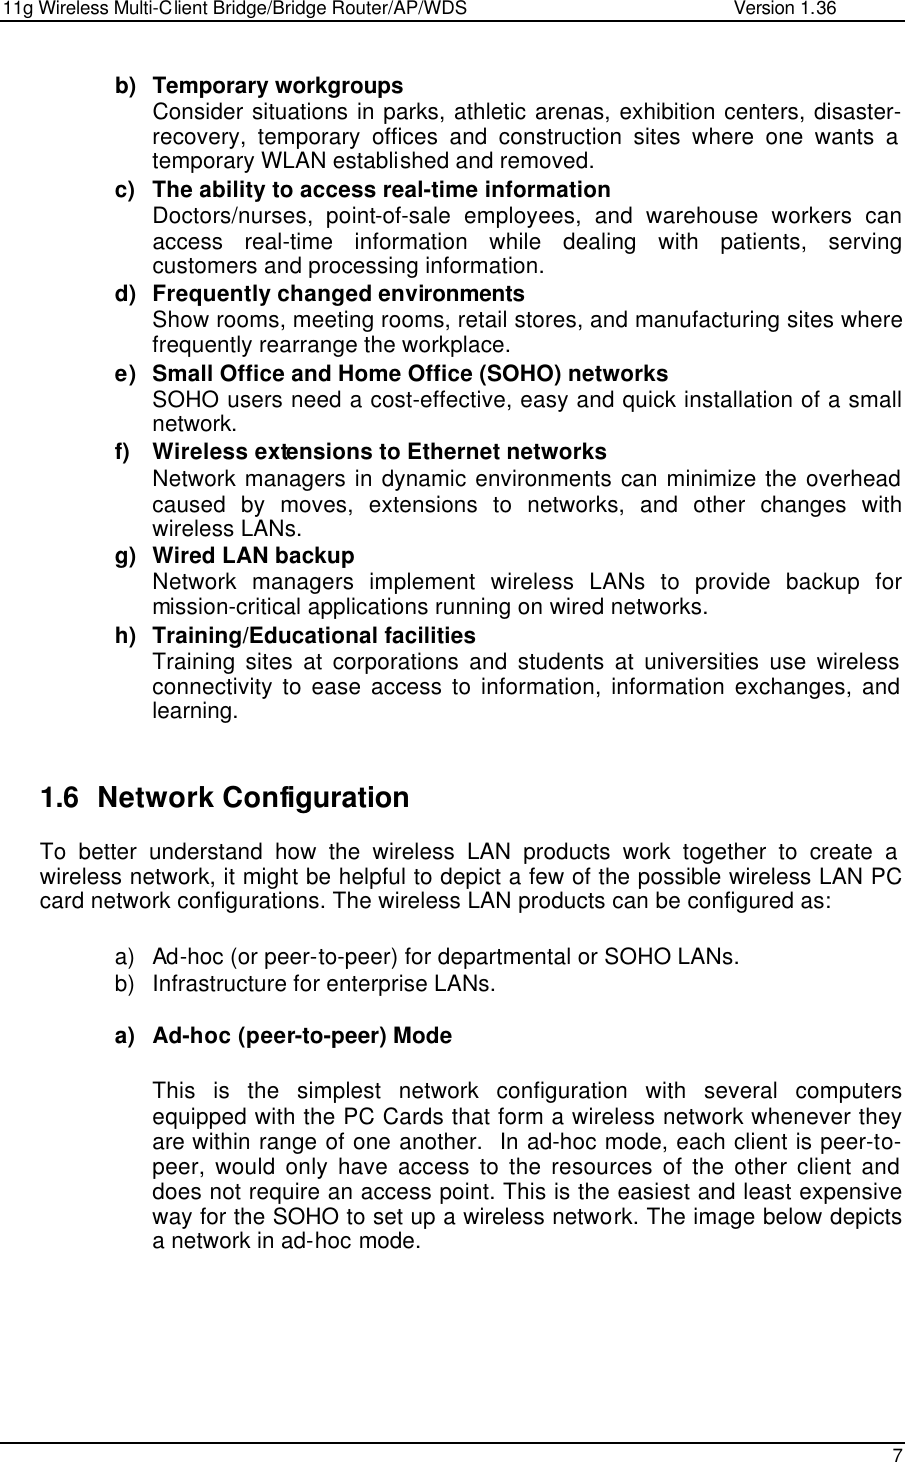 11g Wireless Multi-Client Bridge/Bridge Router/AP/WDS                                                   Version 1.36    7  b) Temporary workgroups Consider situations in parks, athletic arenas, exhibition centers, disaster-recovery, temporary offices and construction sites where one wants a temporary WLAN established and removed. c) The ability to access real-time information Doctors/nurses, point-of-sale employees, and warehouse workers can access real-time information while dealing with patients, serving customers and processing information. d) Frequently changed environments Show rooms, meeting rooms, retail stores, and manufacturing sites where frequently rearrange the workplace. e) Small Office and Home Office (SOHO) networks SOHO users need a cost-effective, easy and quick installation of a small network. f) Wireless extensions to Ethernet networks Network managers in dynamic environments can minimize the overhead caused by moves, extensions to networks, and other changes with wireless LANs. g) Wired LAN backup Network managers implement wireless LANs to provide backup for mission-critical applications running on wired networks. h) Training/Educational facilities Training sites at corporations and students at universities use wireless connectivity to ease access to information, information exchanges, and learning.   1.6 Network Configuration To better understand how the wireless LAN products work together to create a wireless network, it might be helpful to depict a few of the possible wireless LAN PC card network configurations. The wireless LAN products can be configured as:  a) Ad-hoc (or peer-to-peer) for departmental or SOHO LANs. b) Infrastructure for enterprise LANs.  a) Ad-hoc (peer-to-peer) Mode  This is the simplest network configuration with several computers equipped with the PC Cards that form a wireless network whenever they are within range of one another.  In ad-hoc mode, each client is peer-to-peer, would only have access to the resources of the other client and does not require an access point. This is the easiest and least expensive way for the SOHO to set up a wireless network. The image below depicts a network in ad-hoc mode.       